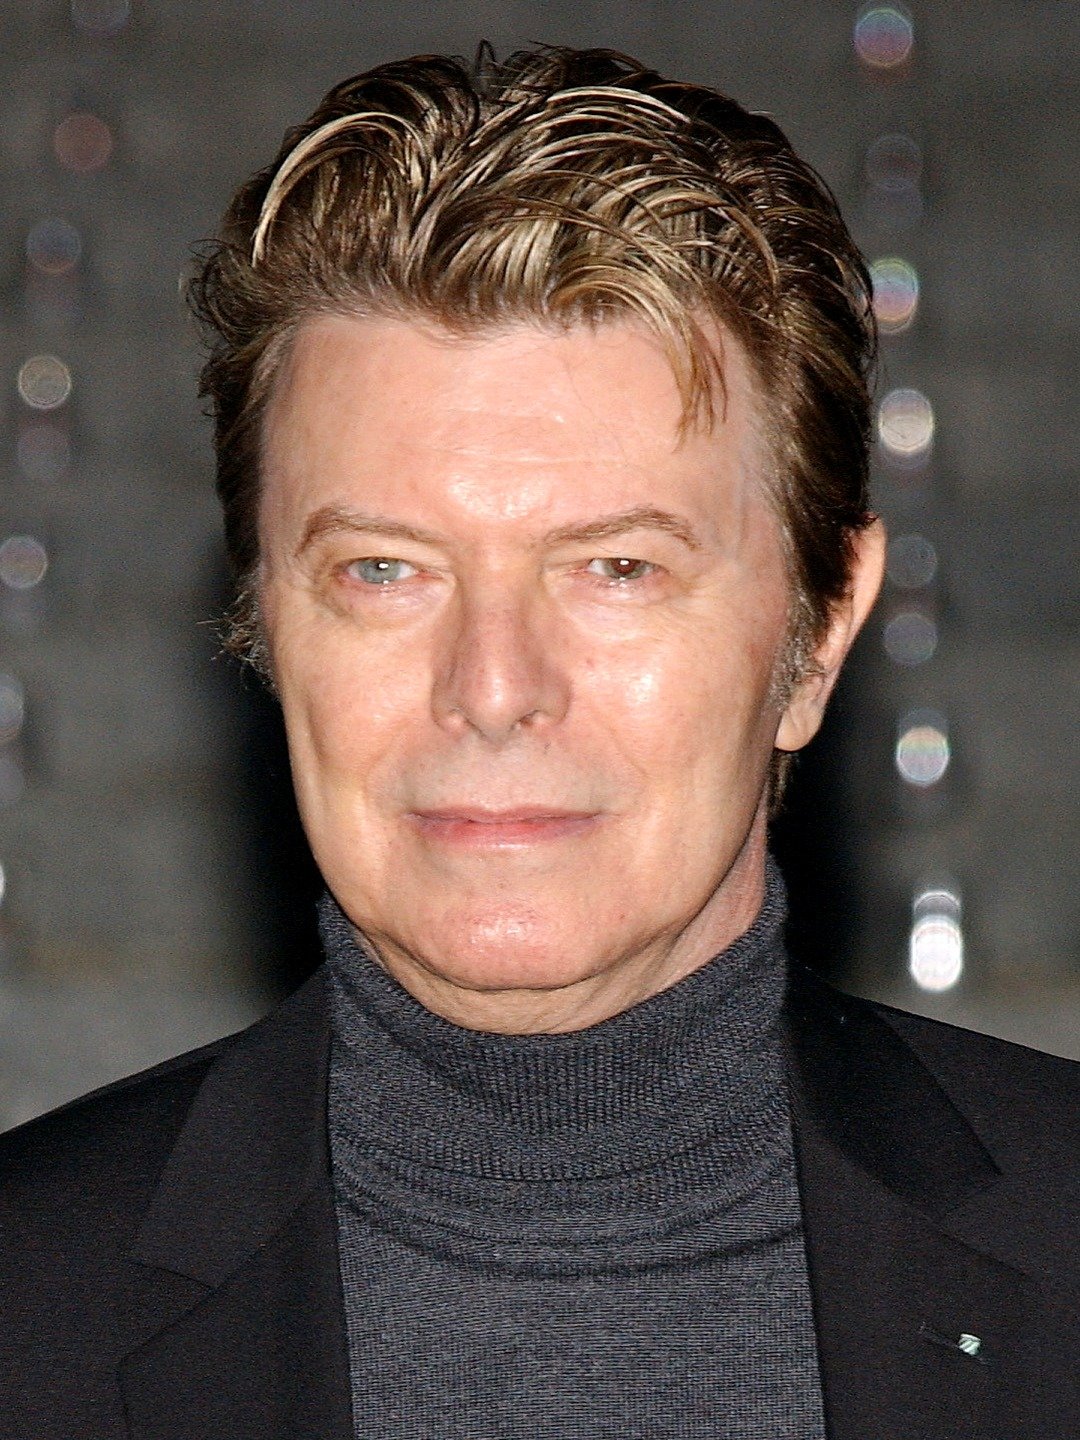 How tall is David Bowie?